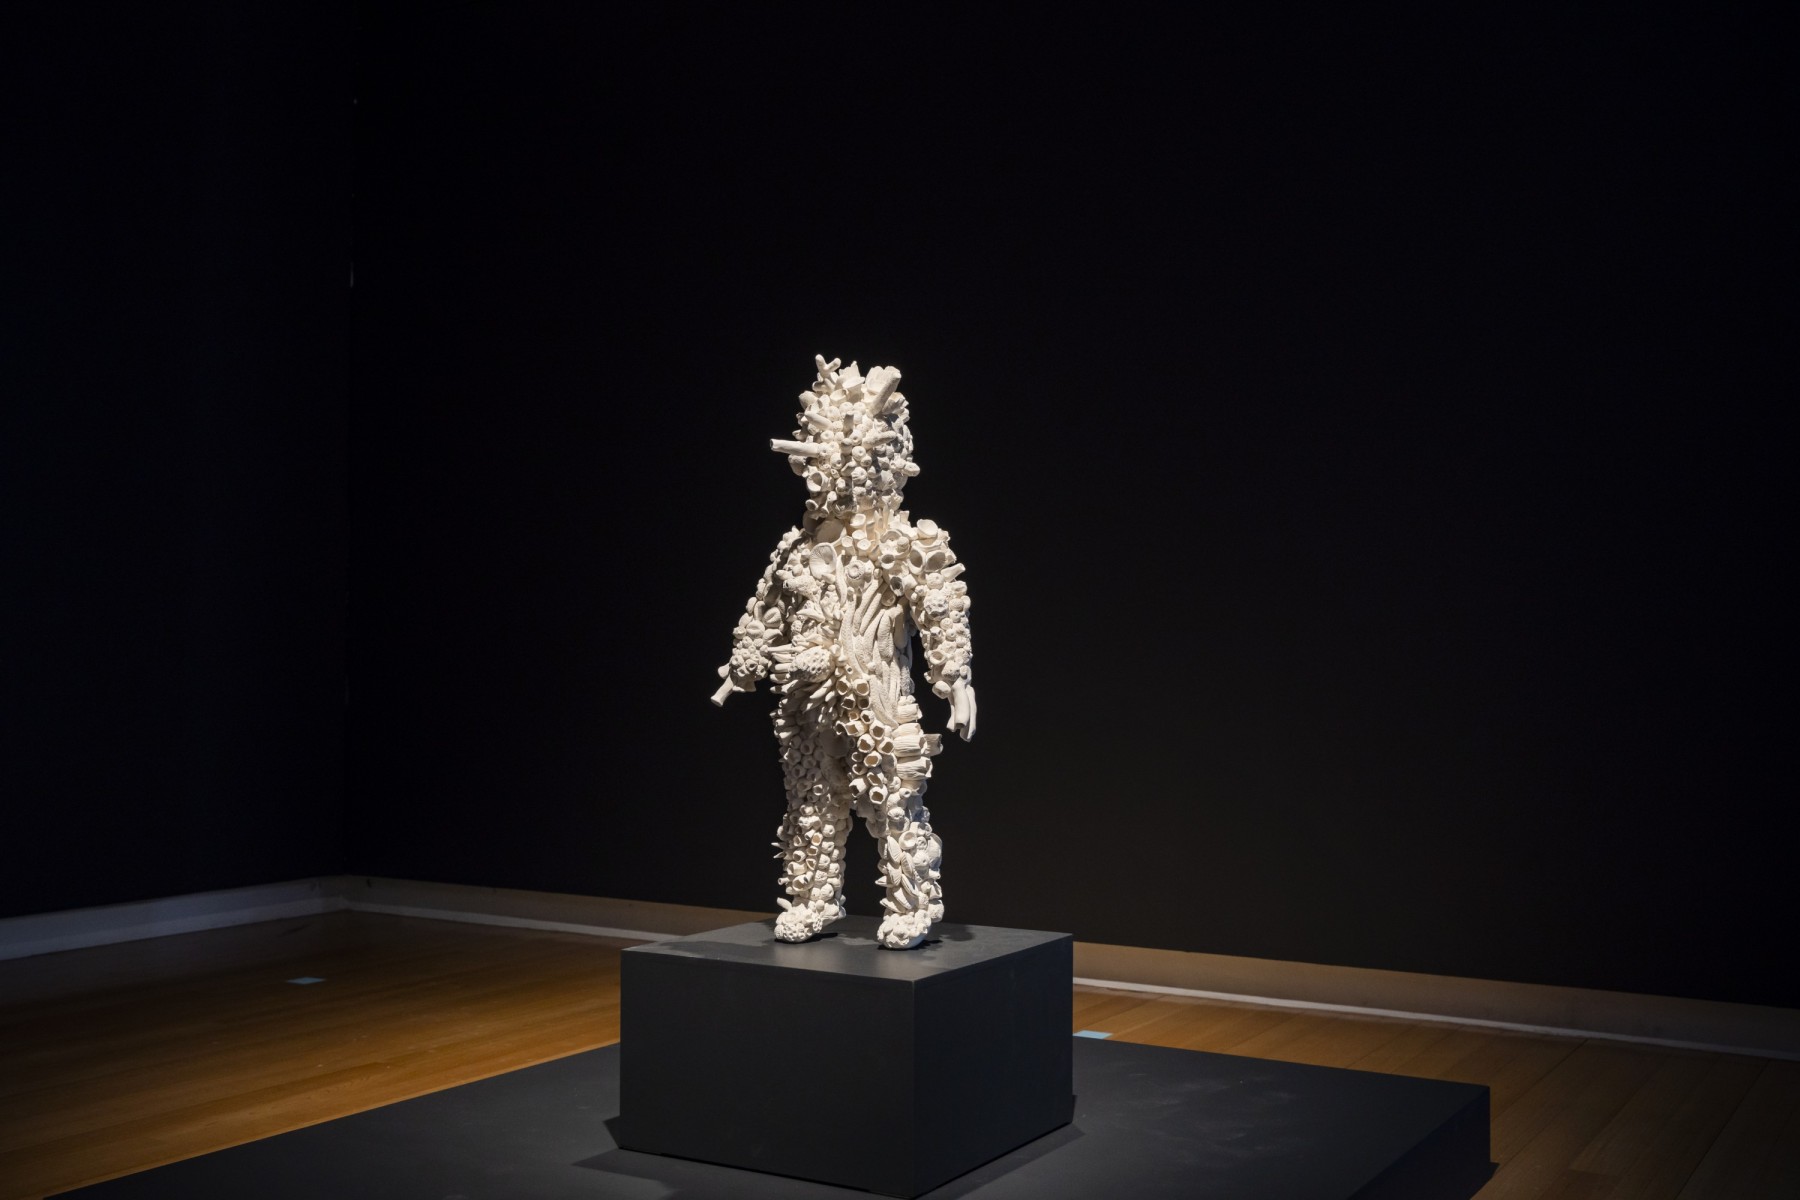 A semi-human form covered in white porcelain coral shapes stands on a black pedestal